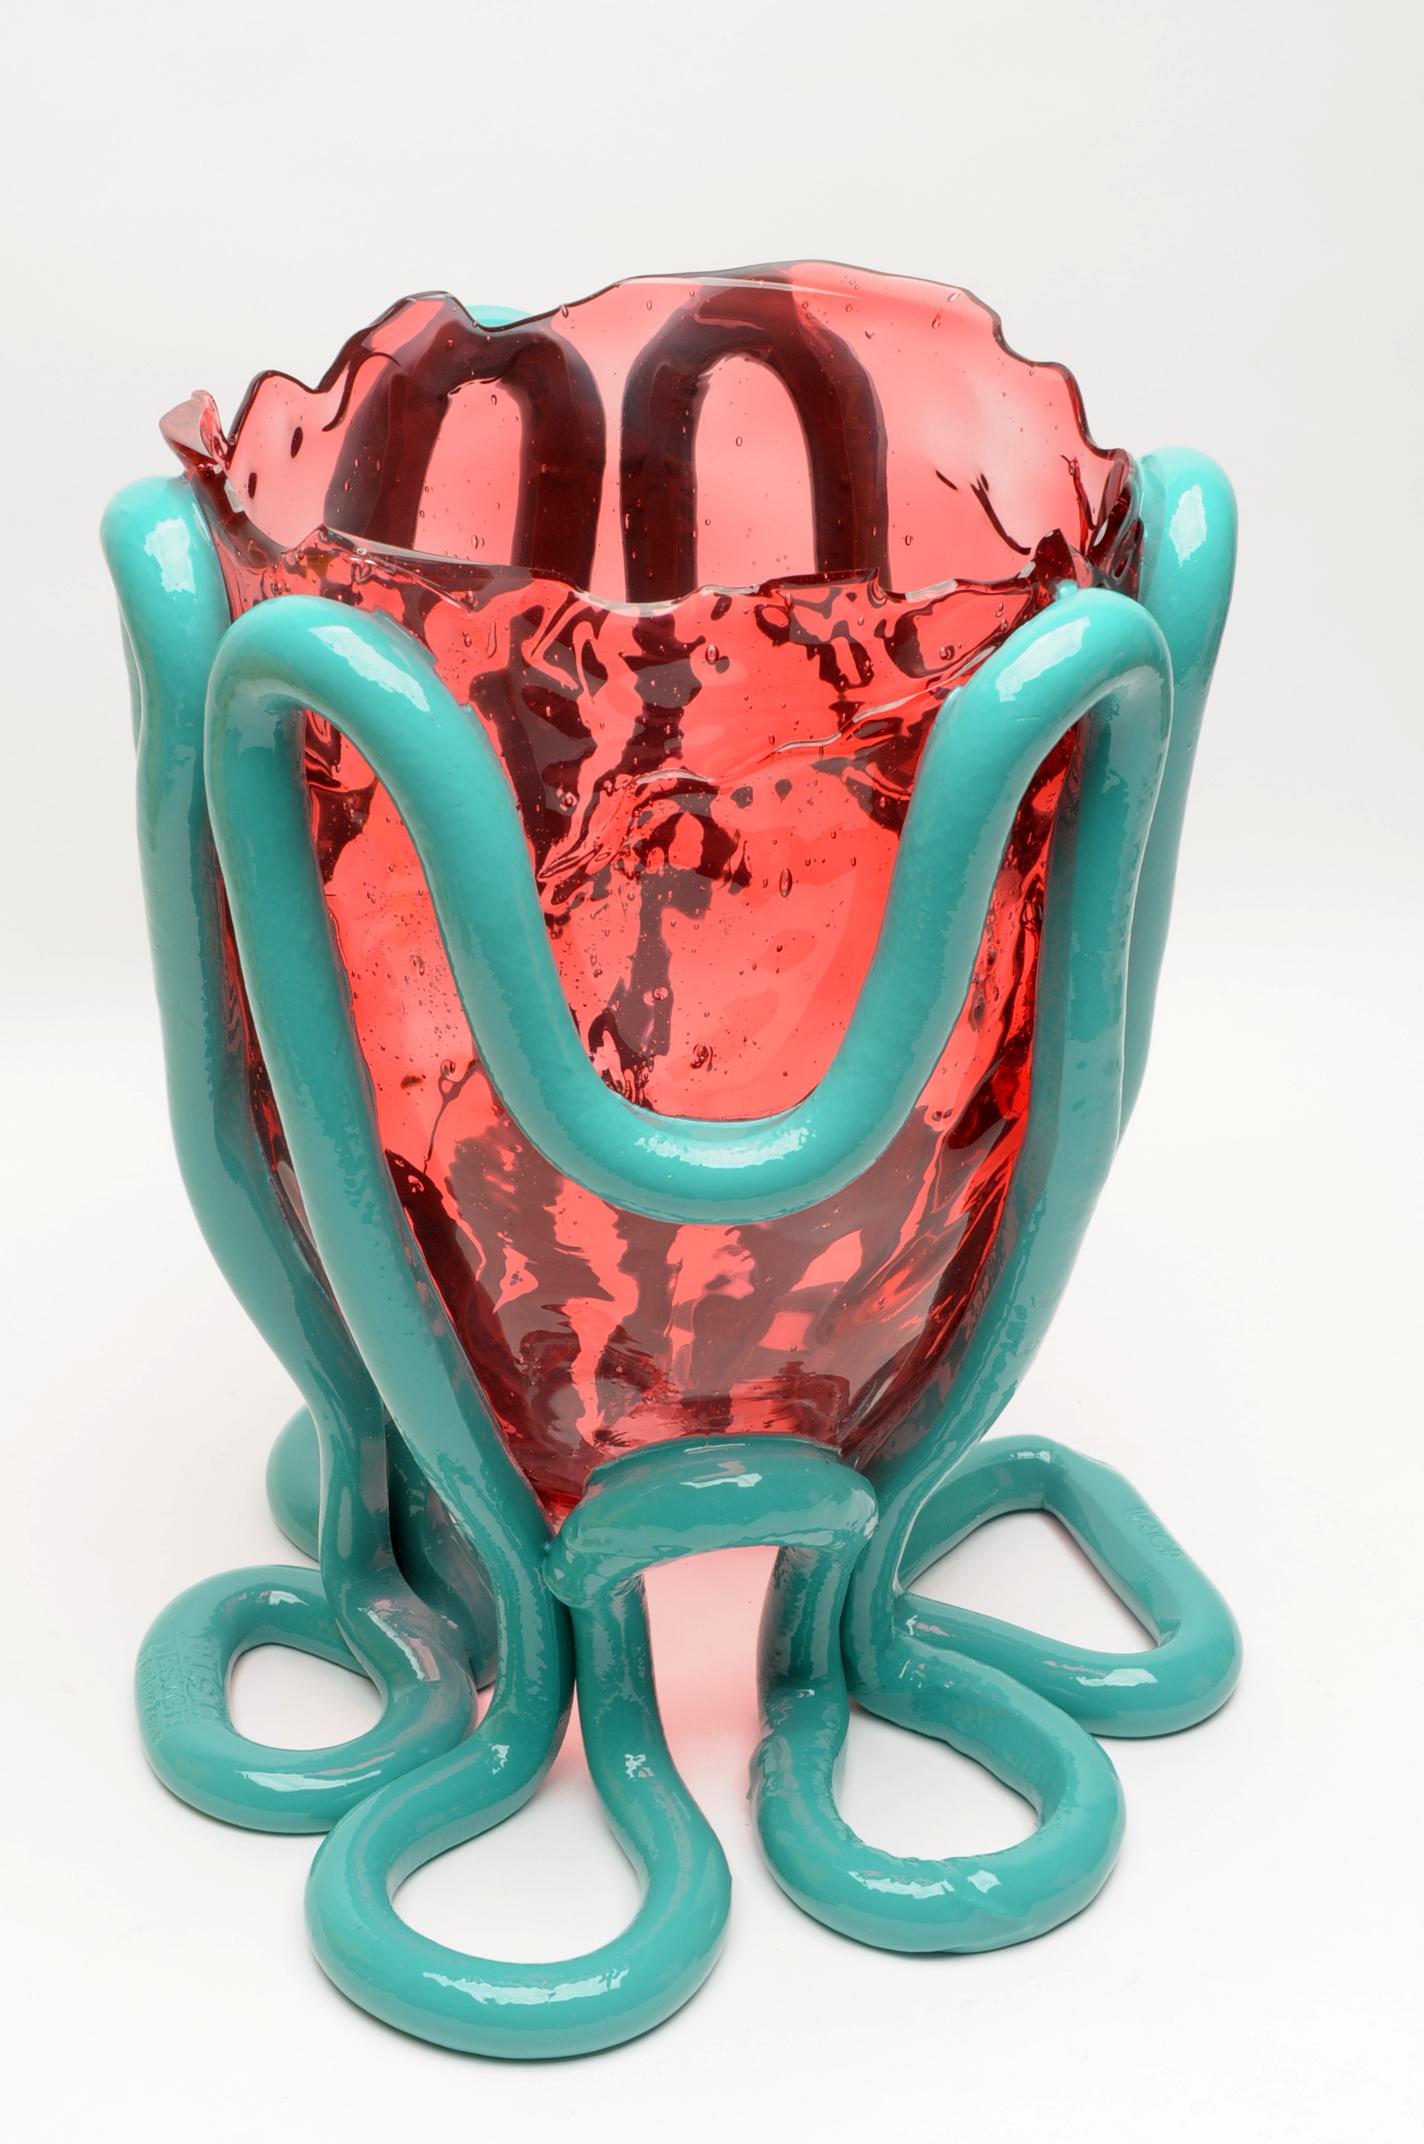 Contemporary Gaetano Pesce Indian Summer XL Vase Soft Resin Fuchsia Ocean Blue In New Condition For Sale In barasso, IT